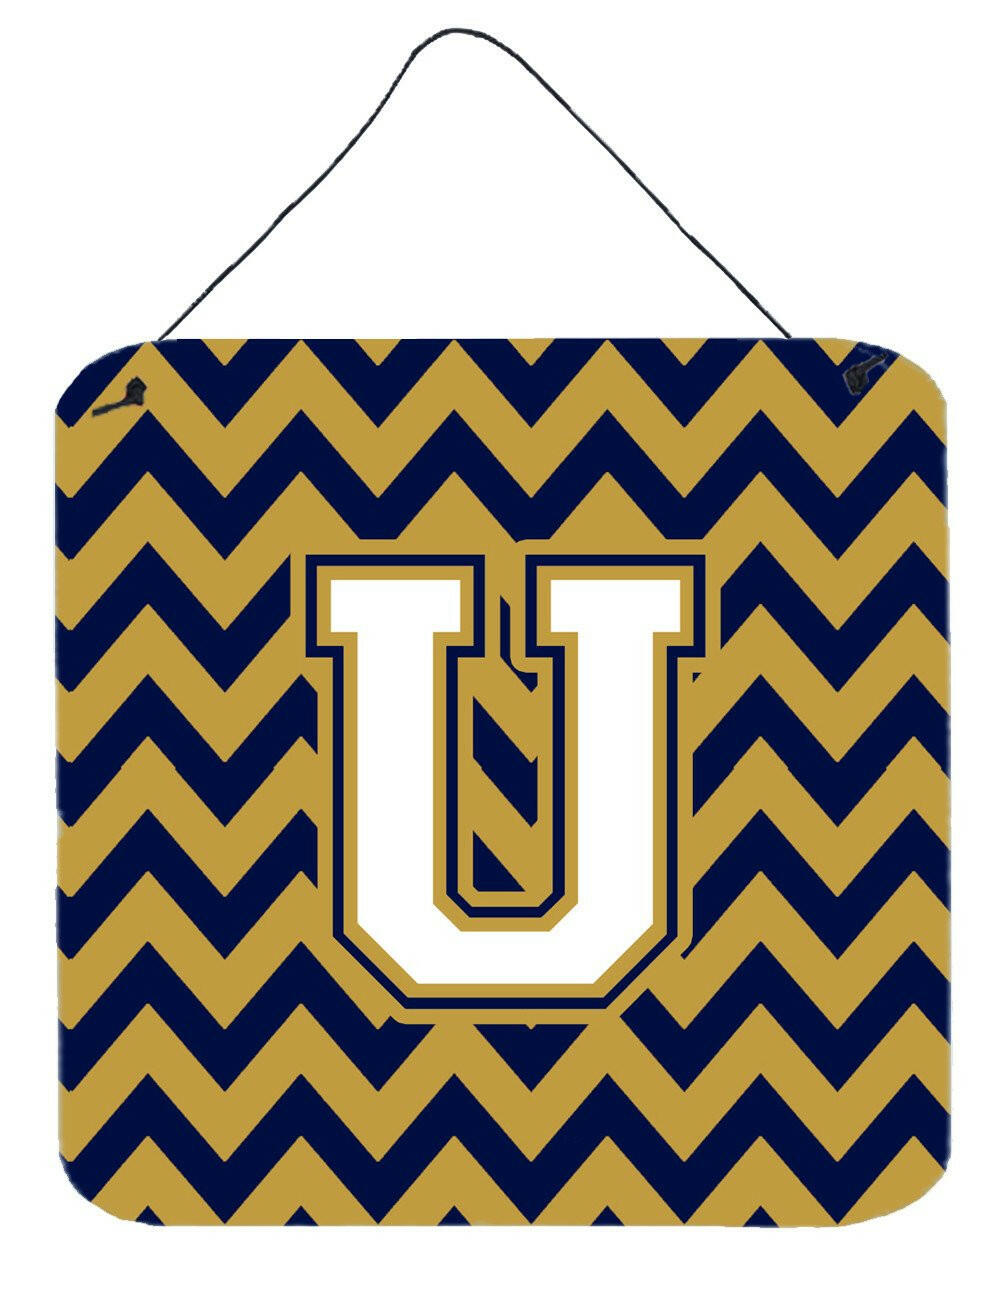 Letter U Chevron Navy Blue and Gold Wall or Door Hanging Prints CJ1057-UDS66 by Caroline's Treasures